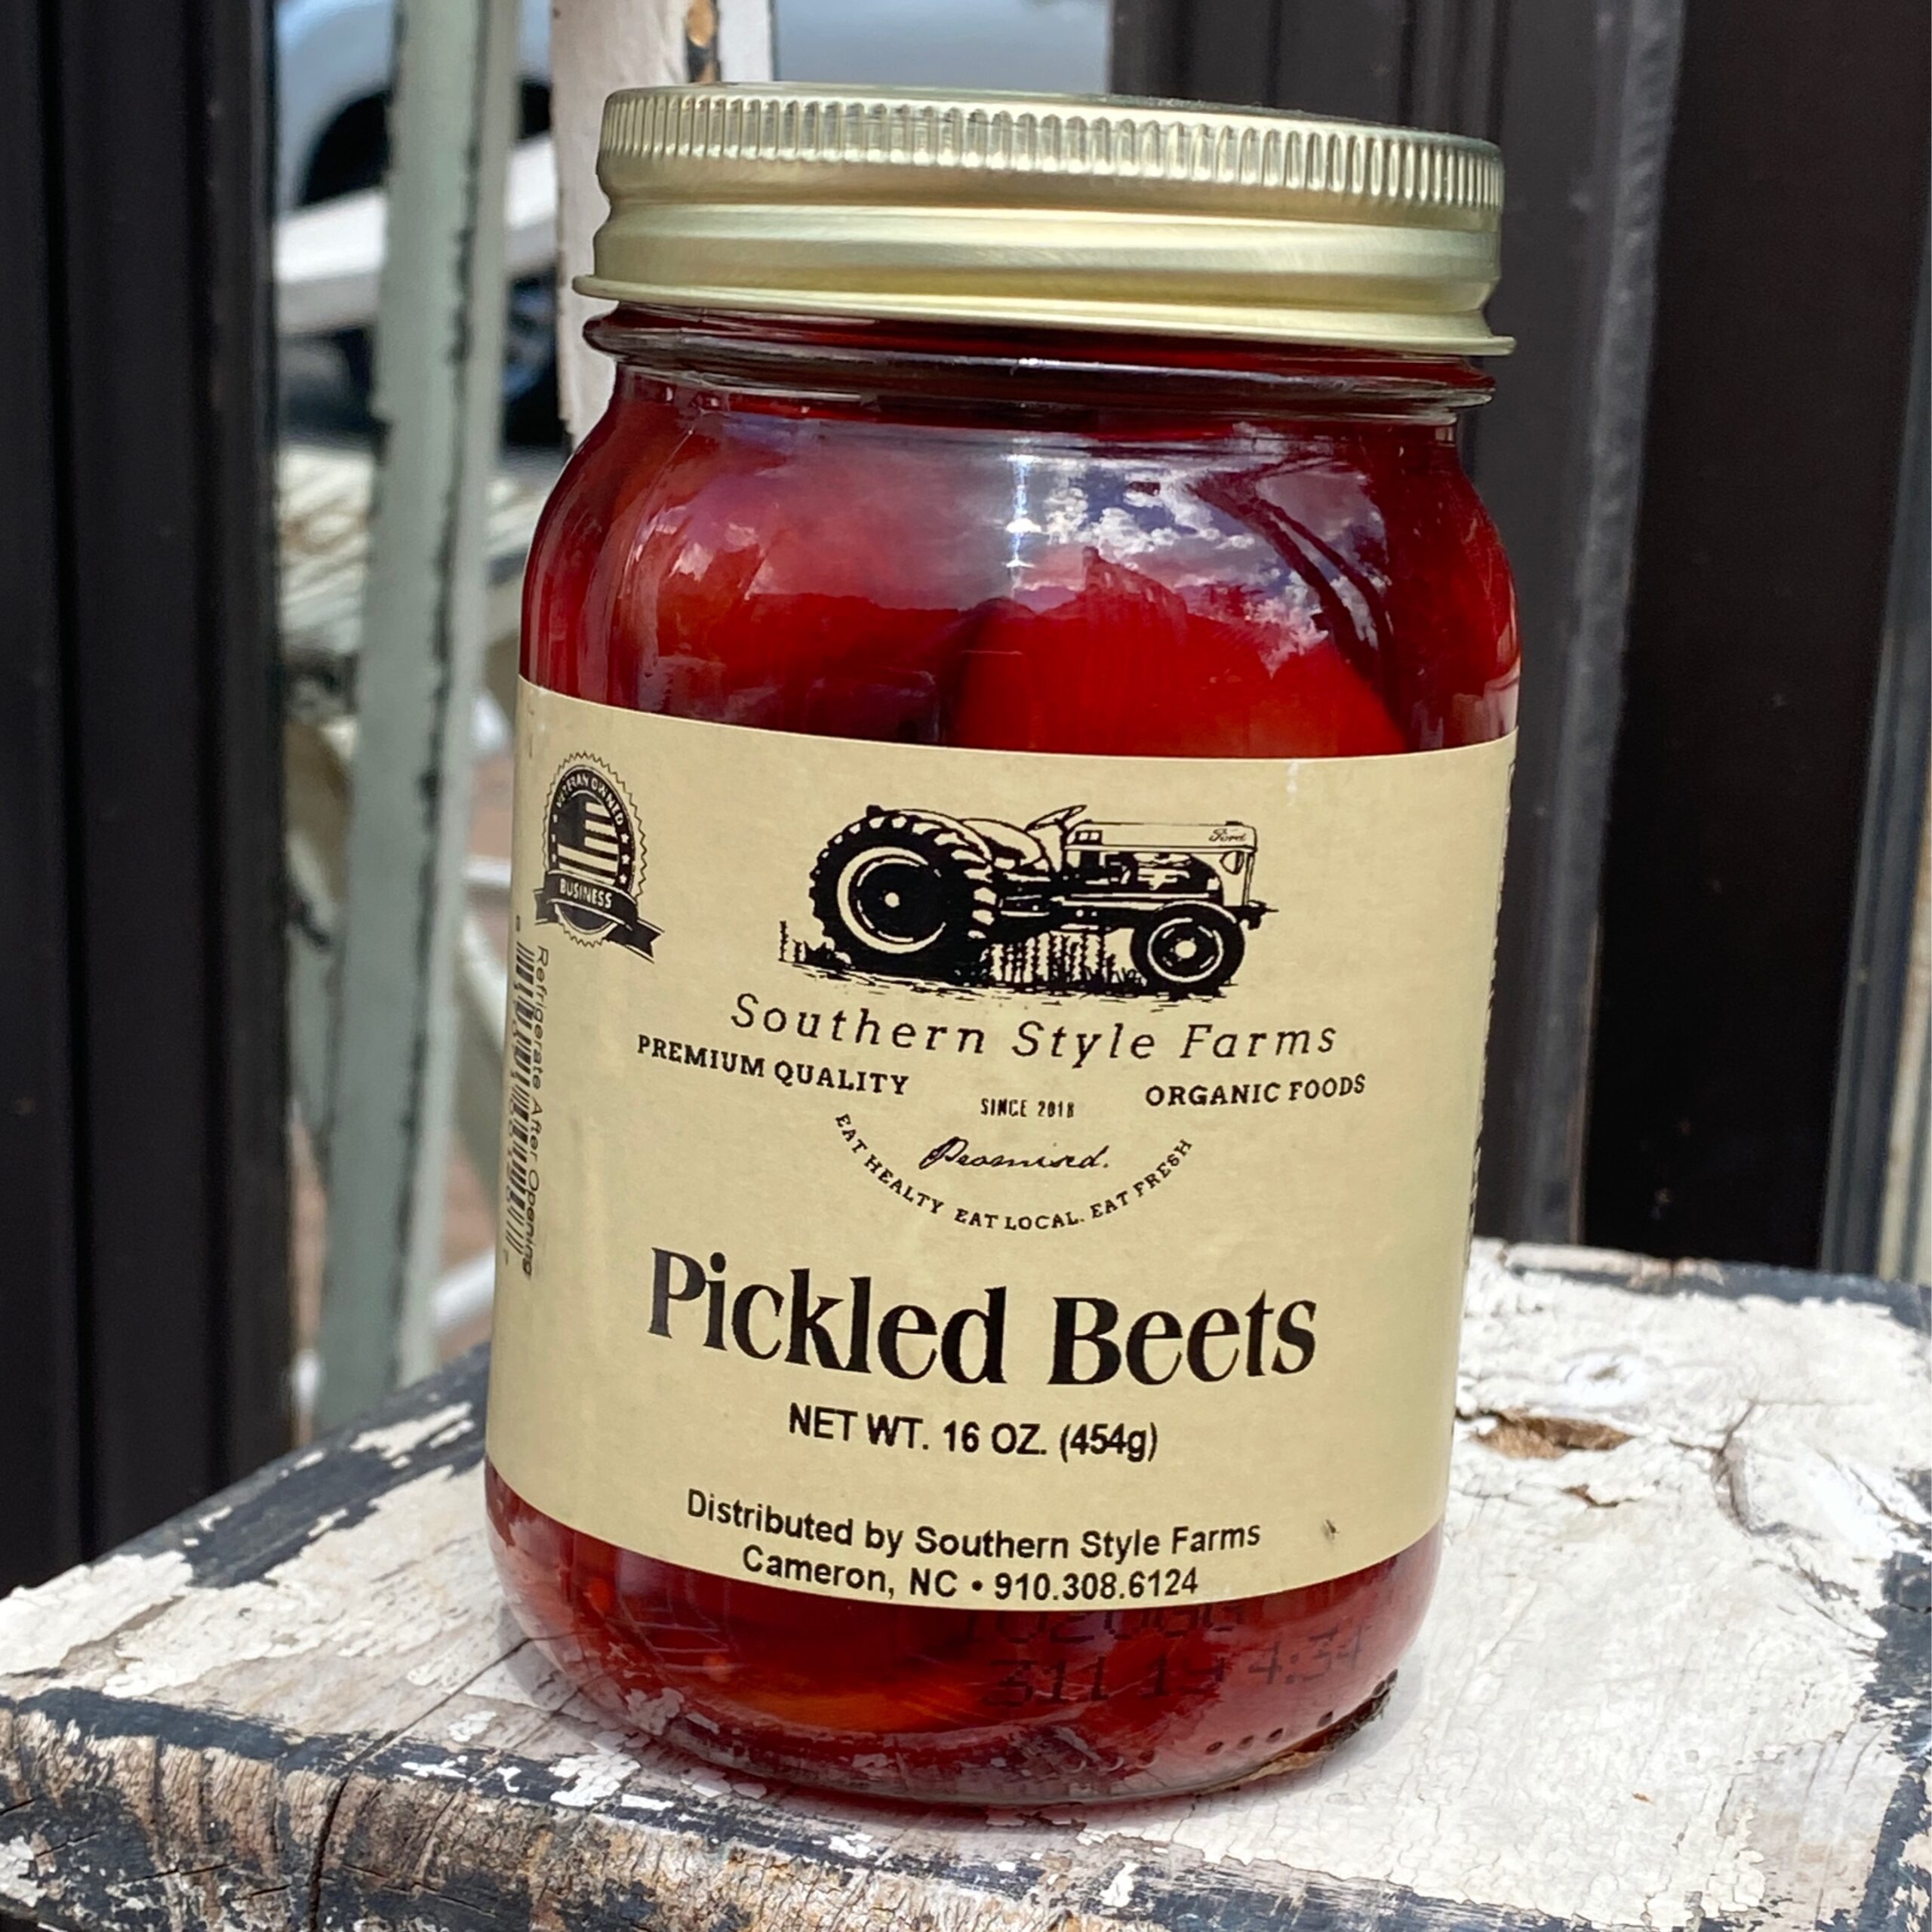 Southern Style Farms Pickled Beets 16oz